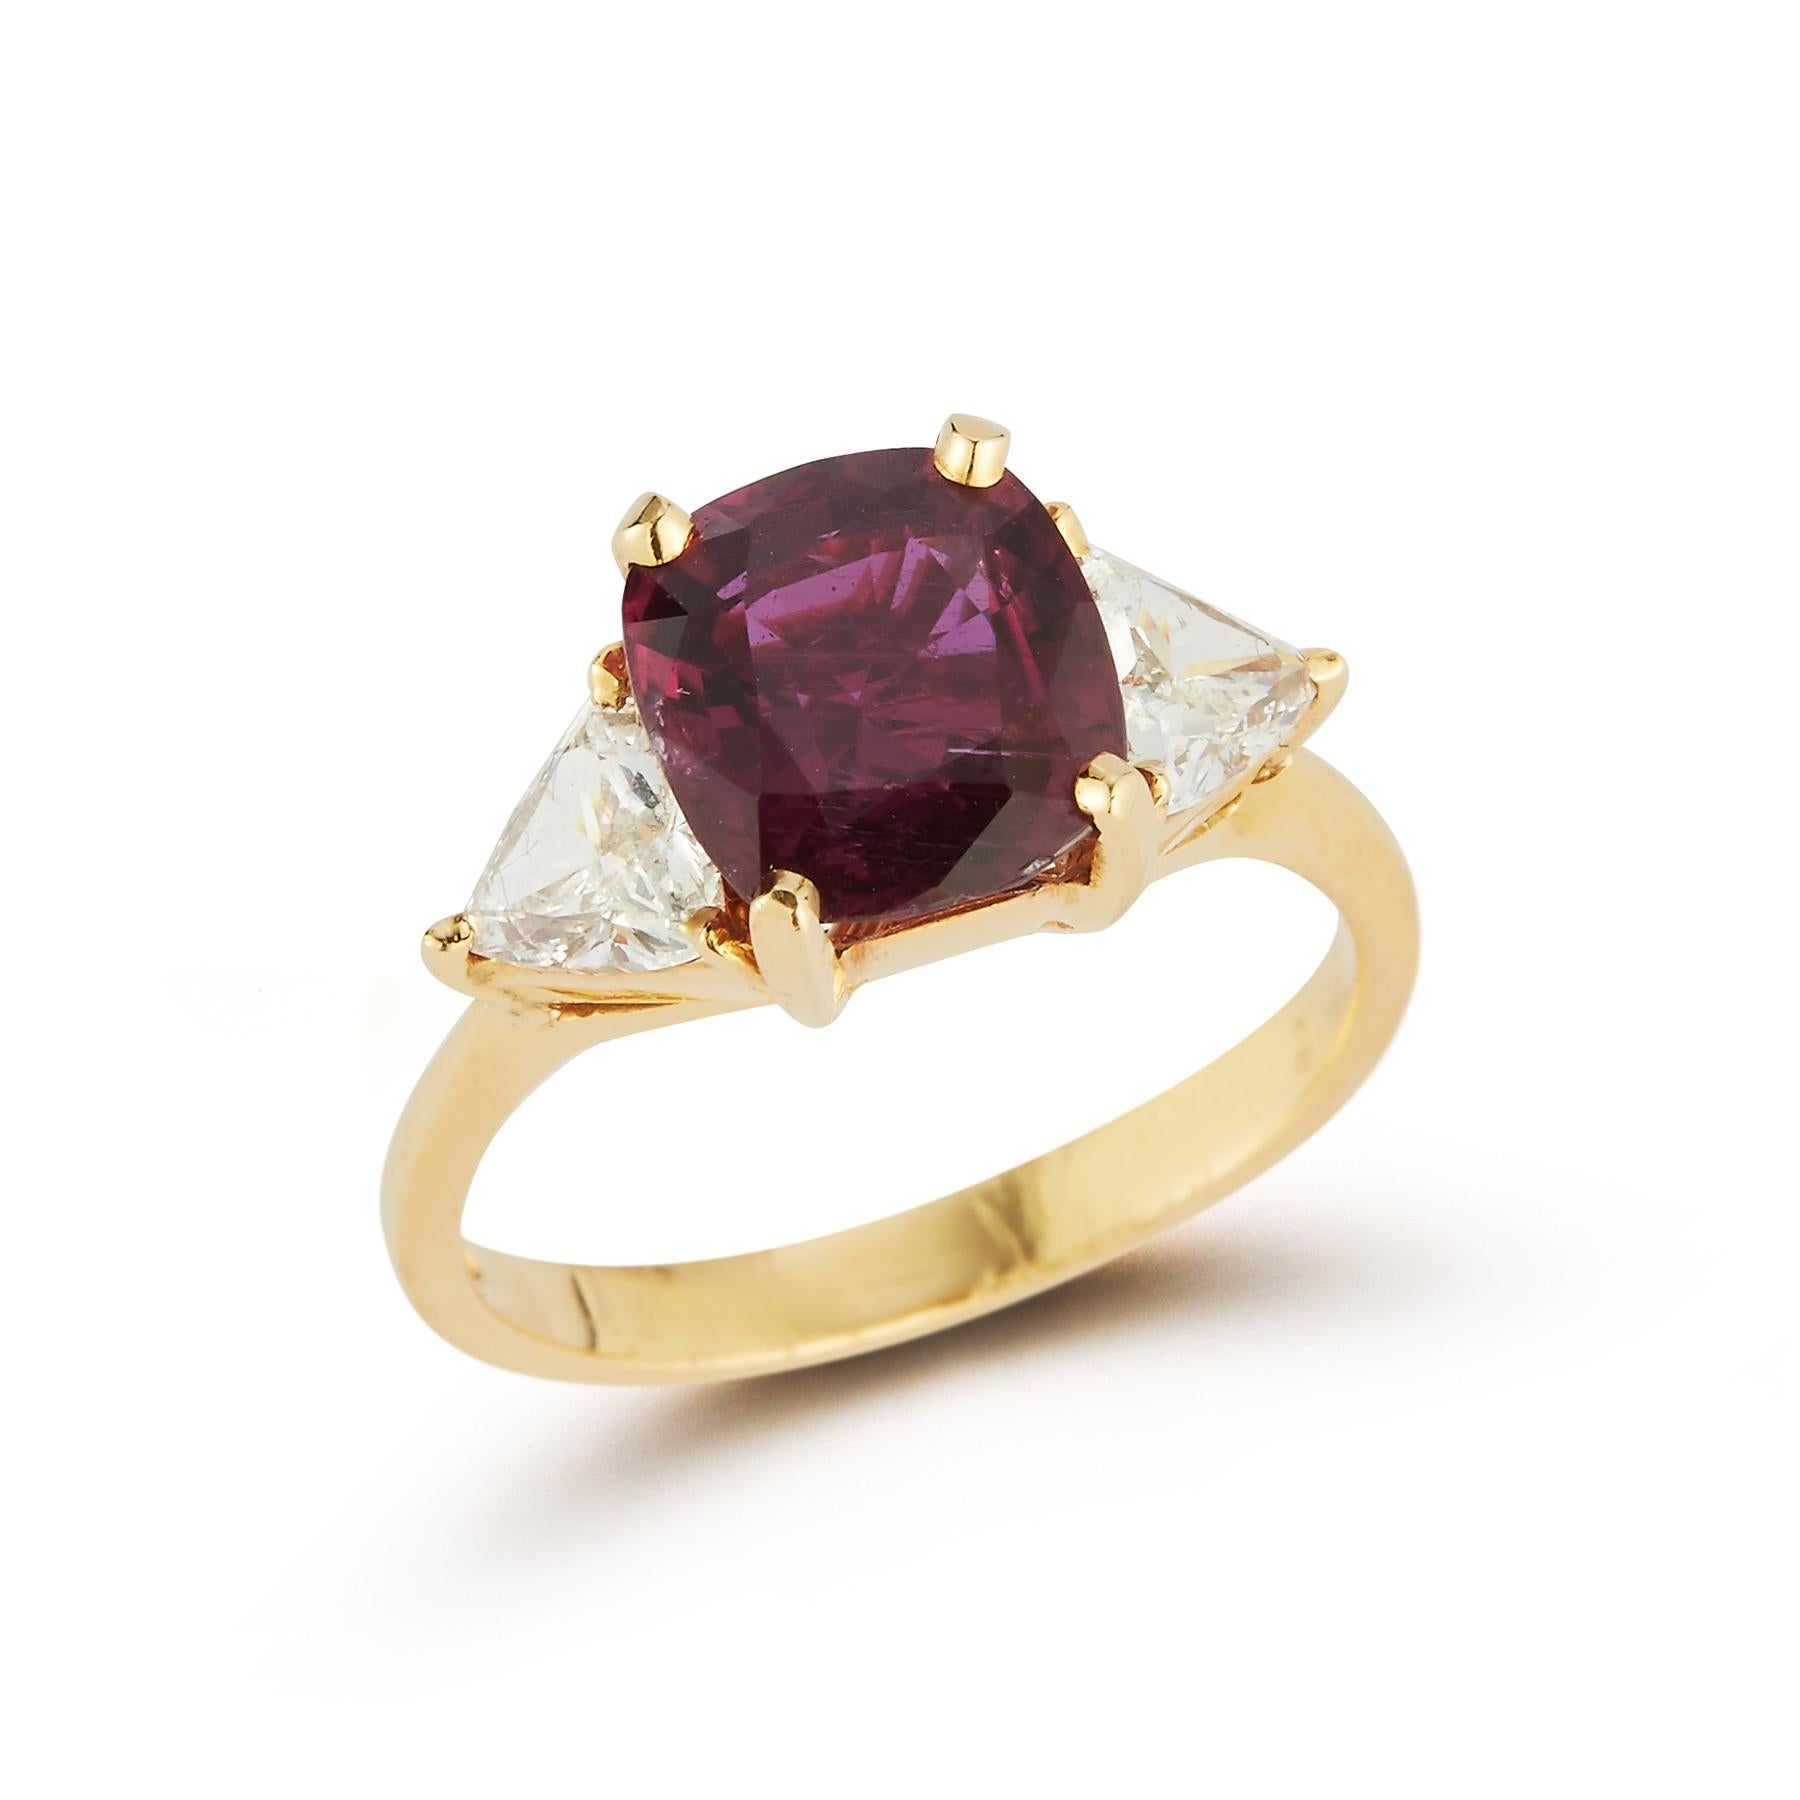 Three Stone Ruby & Diamonds Ring

Cushion Cut Ruby 3.25 Carats Surrounded by 2 Triangle Cut Diamonds approximately 0.89 Carats

18k Gold

Ring Size: 6.5

Resizable Free of Charge